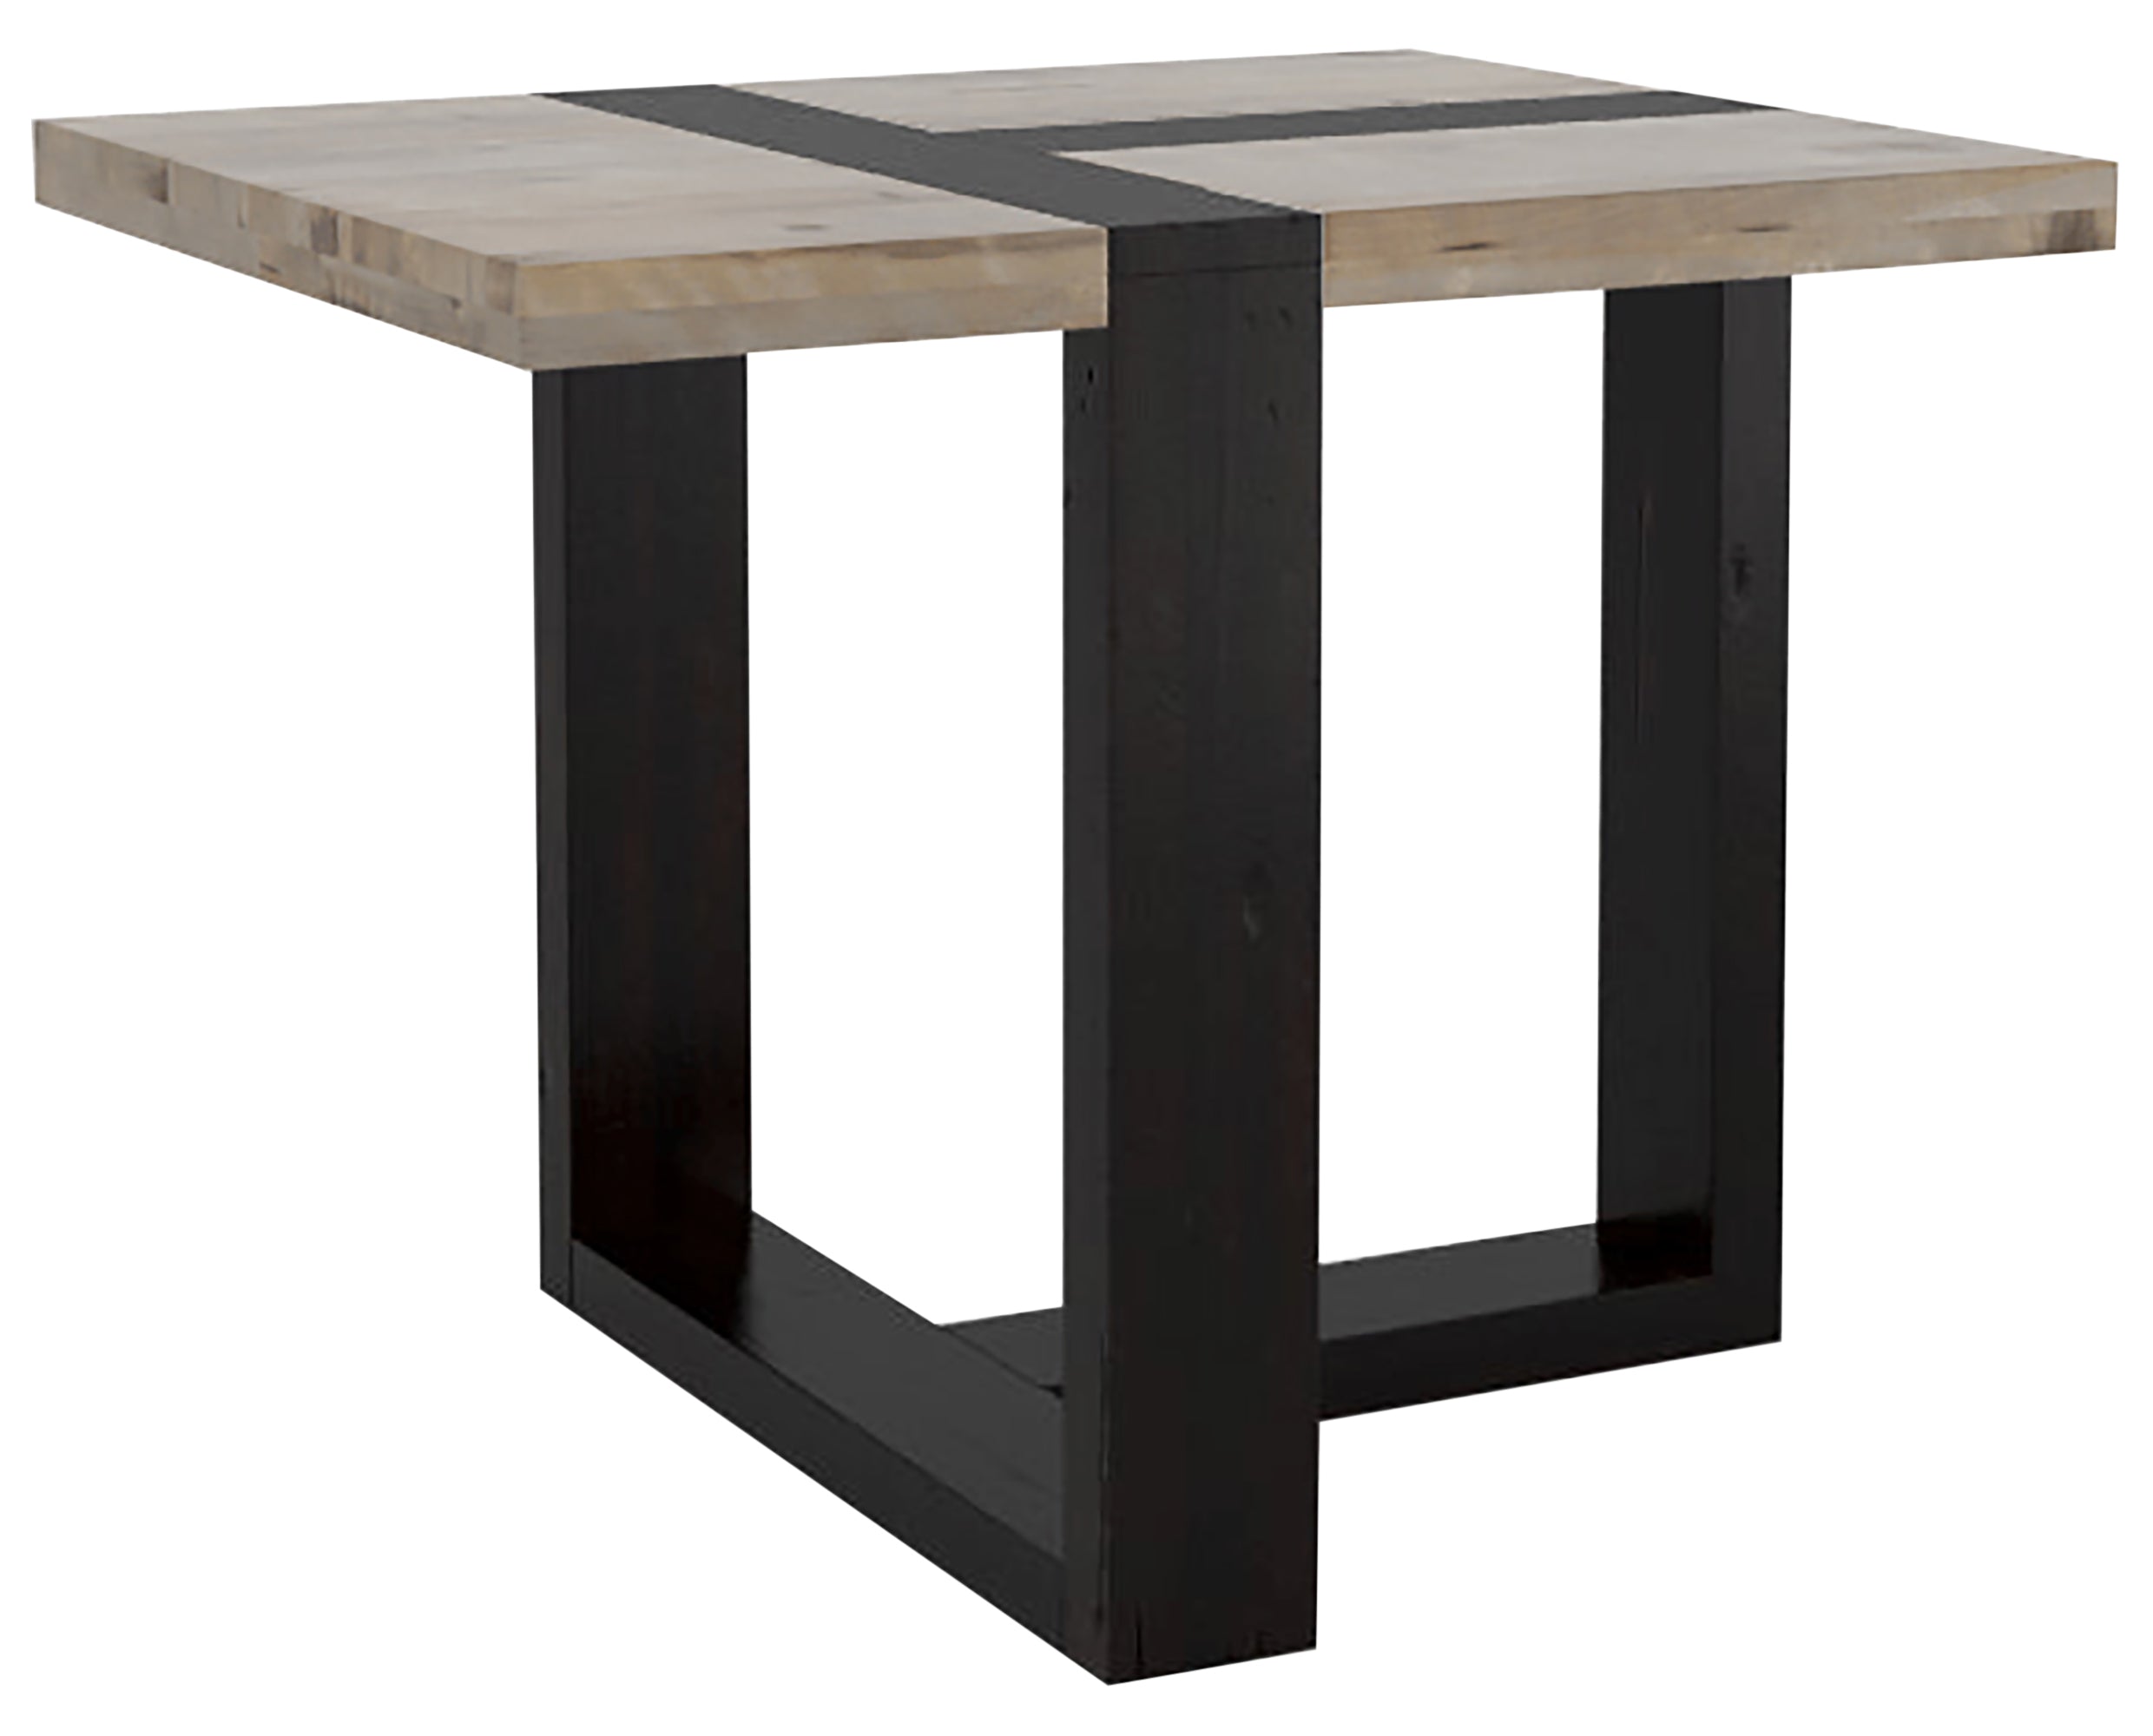 Peppercorn Washed | Canadel Loft End Table 2824 - CR Legs | Valley Ridge Furniture